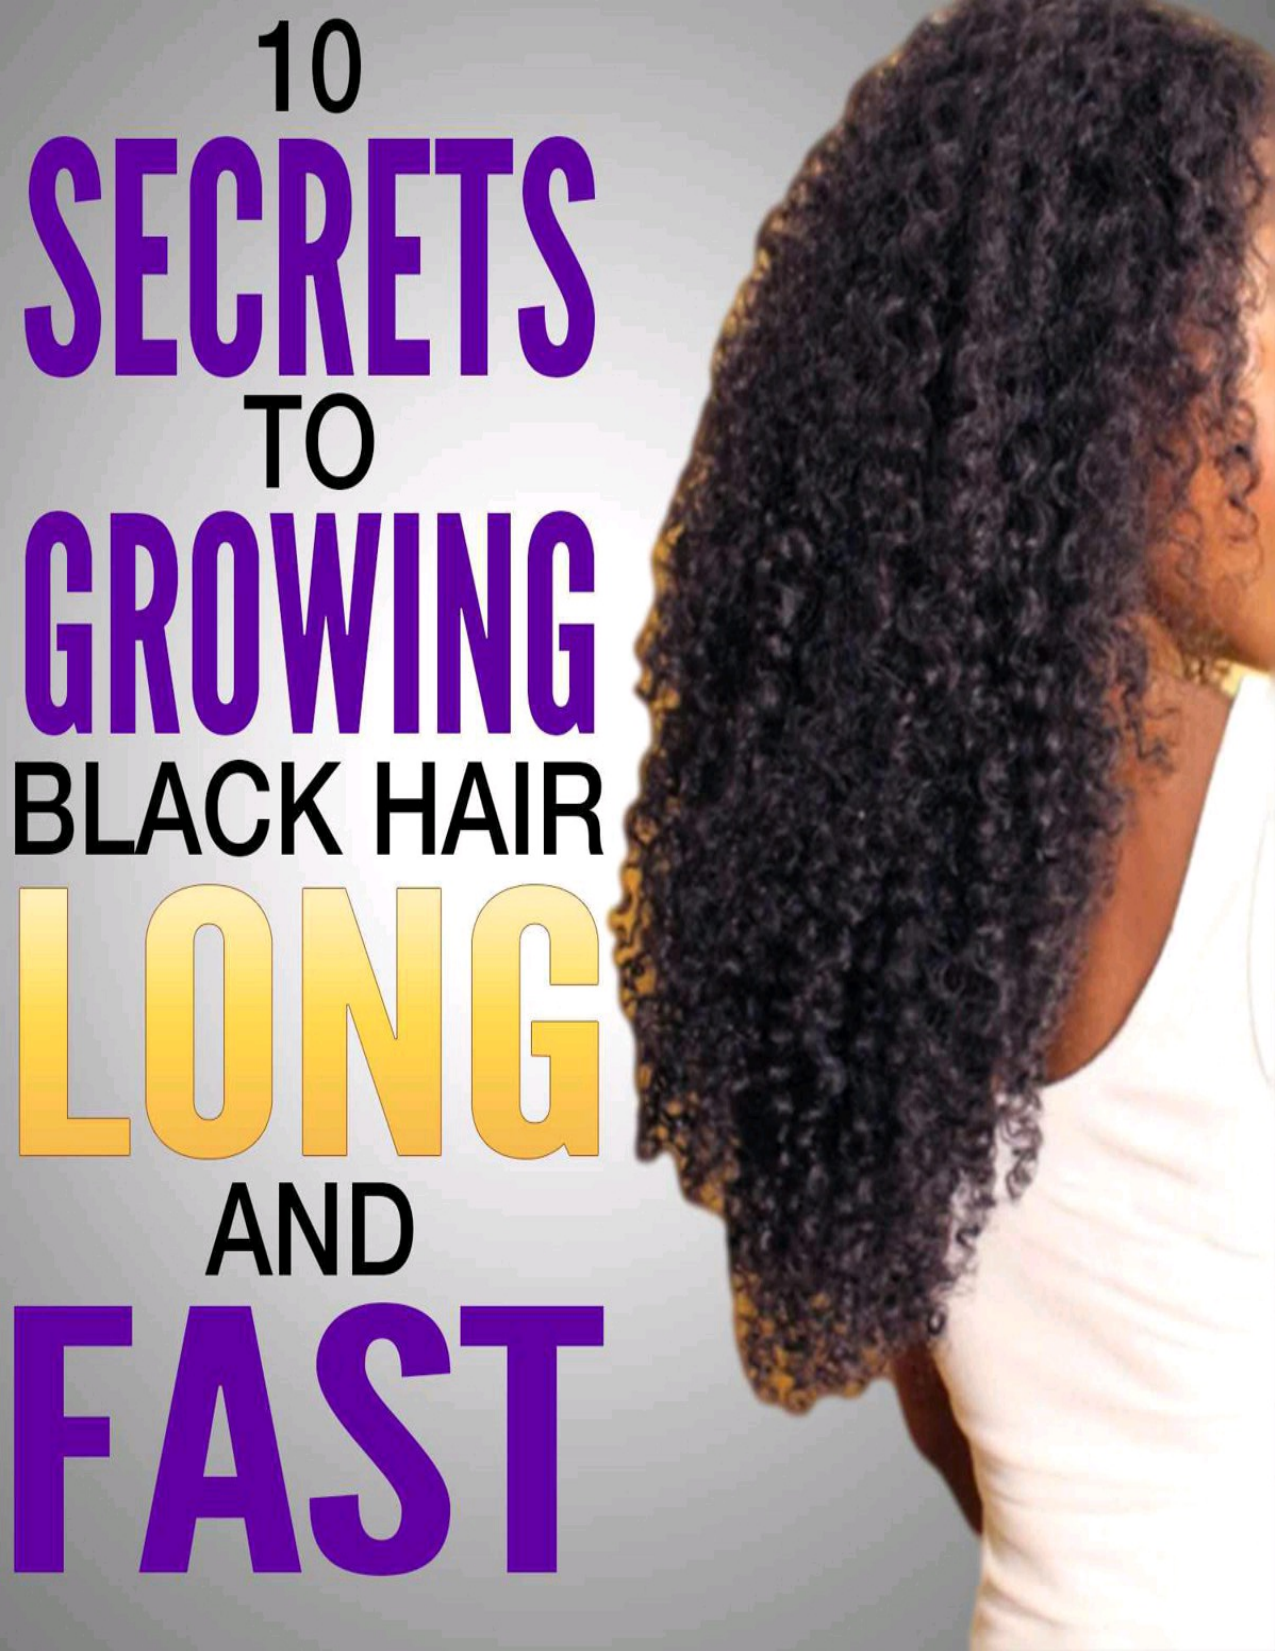 10 Secrets to Growing Black Hair Long and Fast